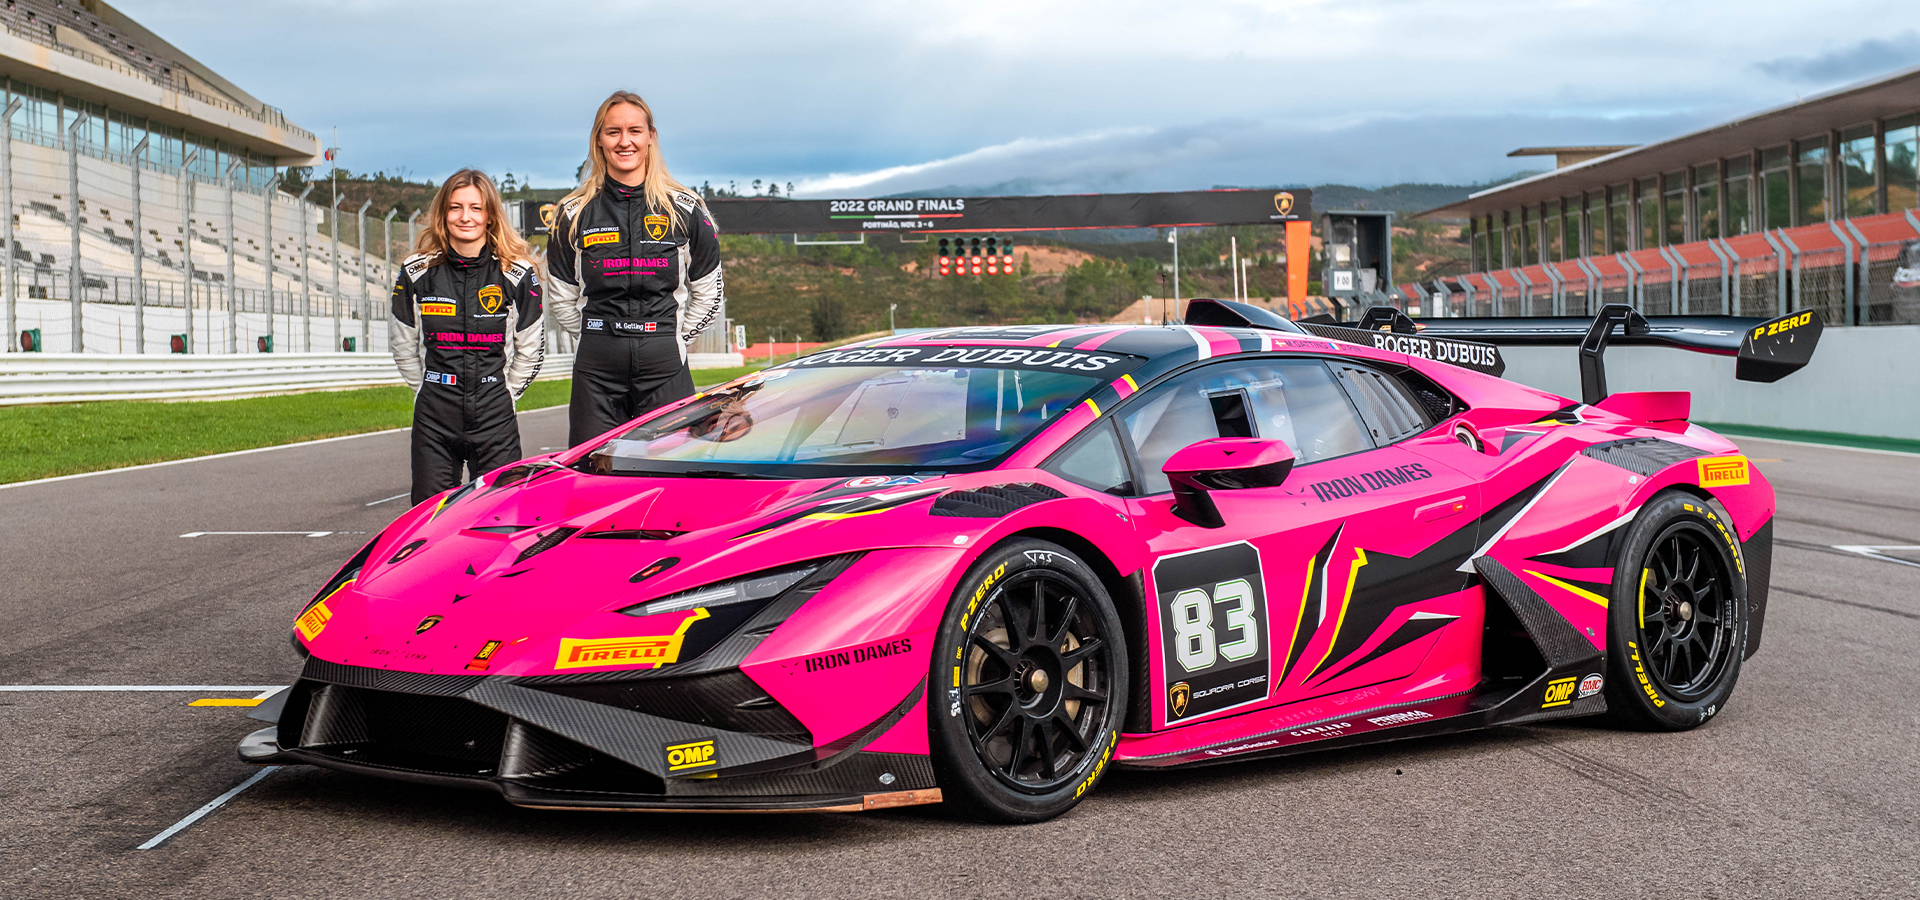 Lamborghini Super Trofeo embarks on first Grand Finals visit to Portimão  with 65 cars